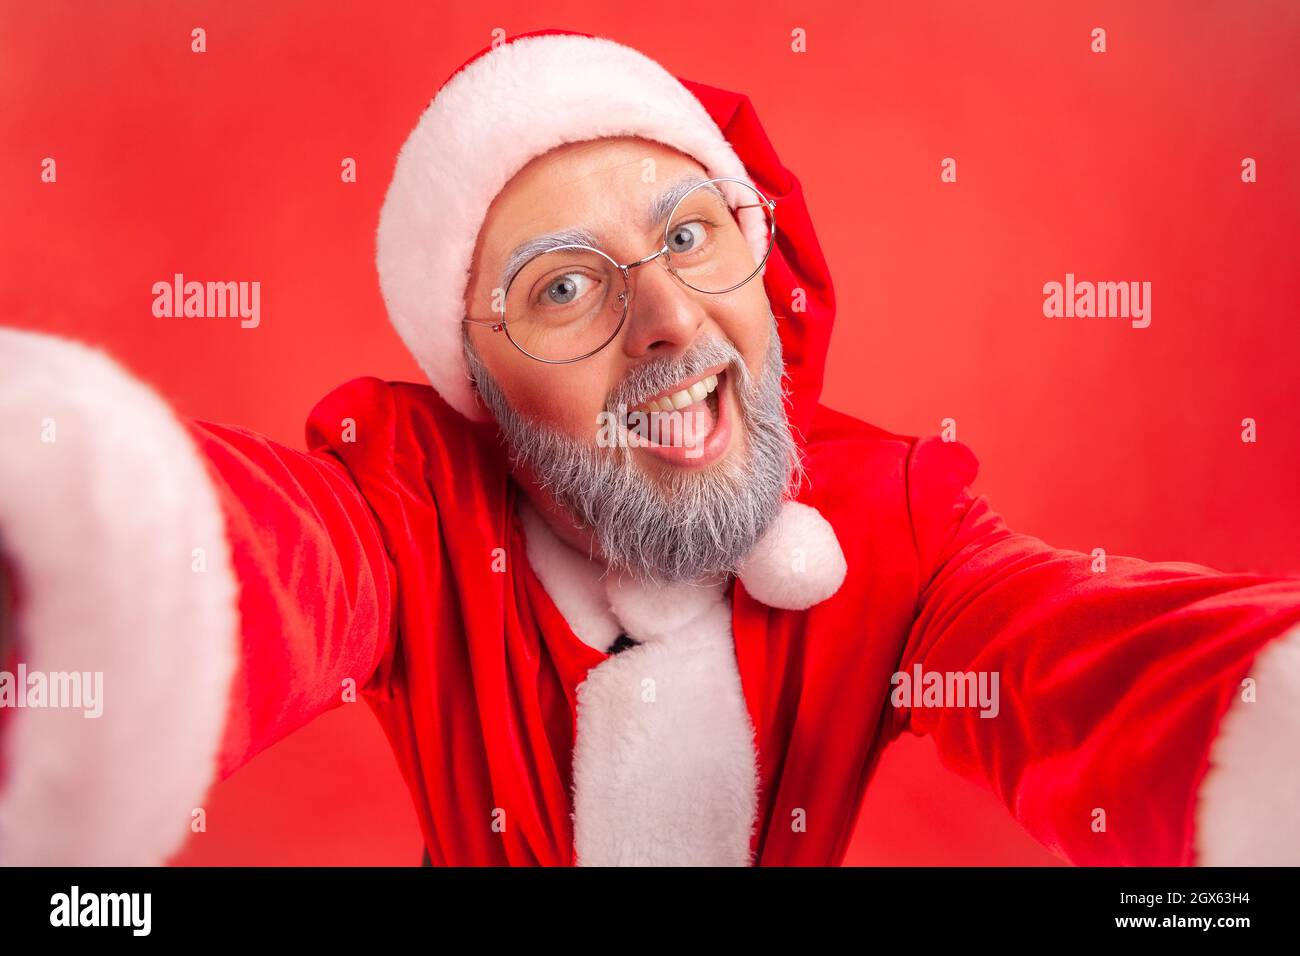 Happy funny elderly man with gray beard wearing santa claus costume making selfie POV, looking at camera with smile and positive expression. Indoor studio shot isolated on red background. Stock Photo